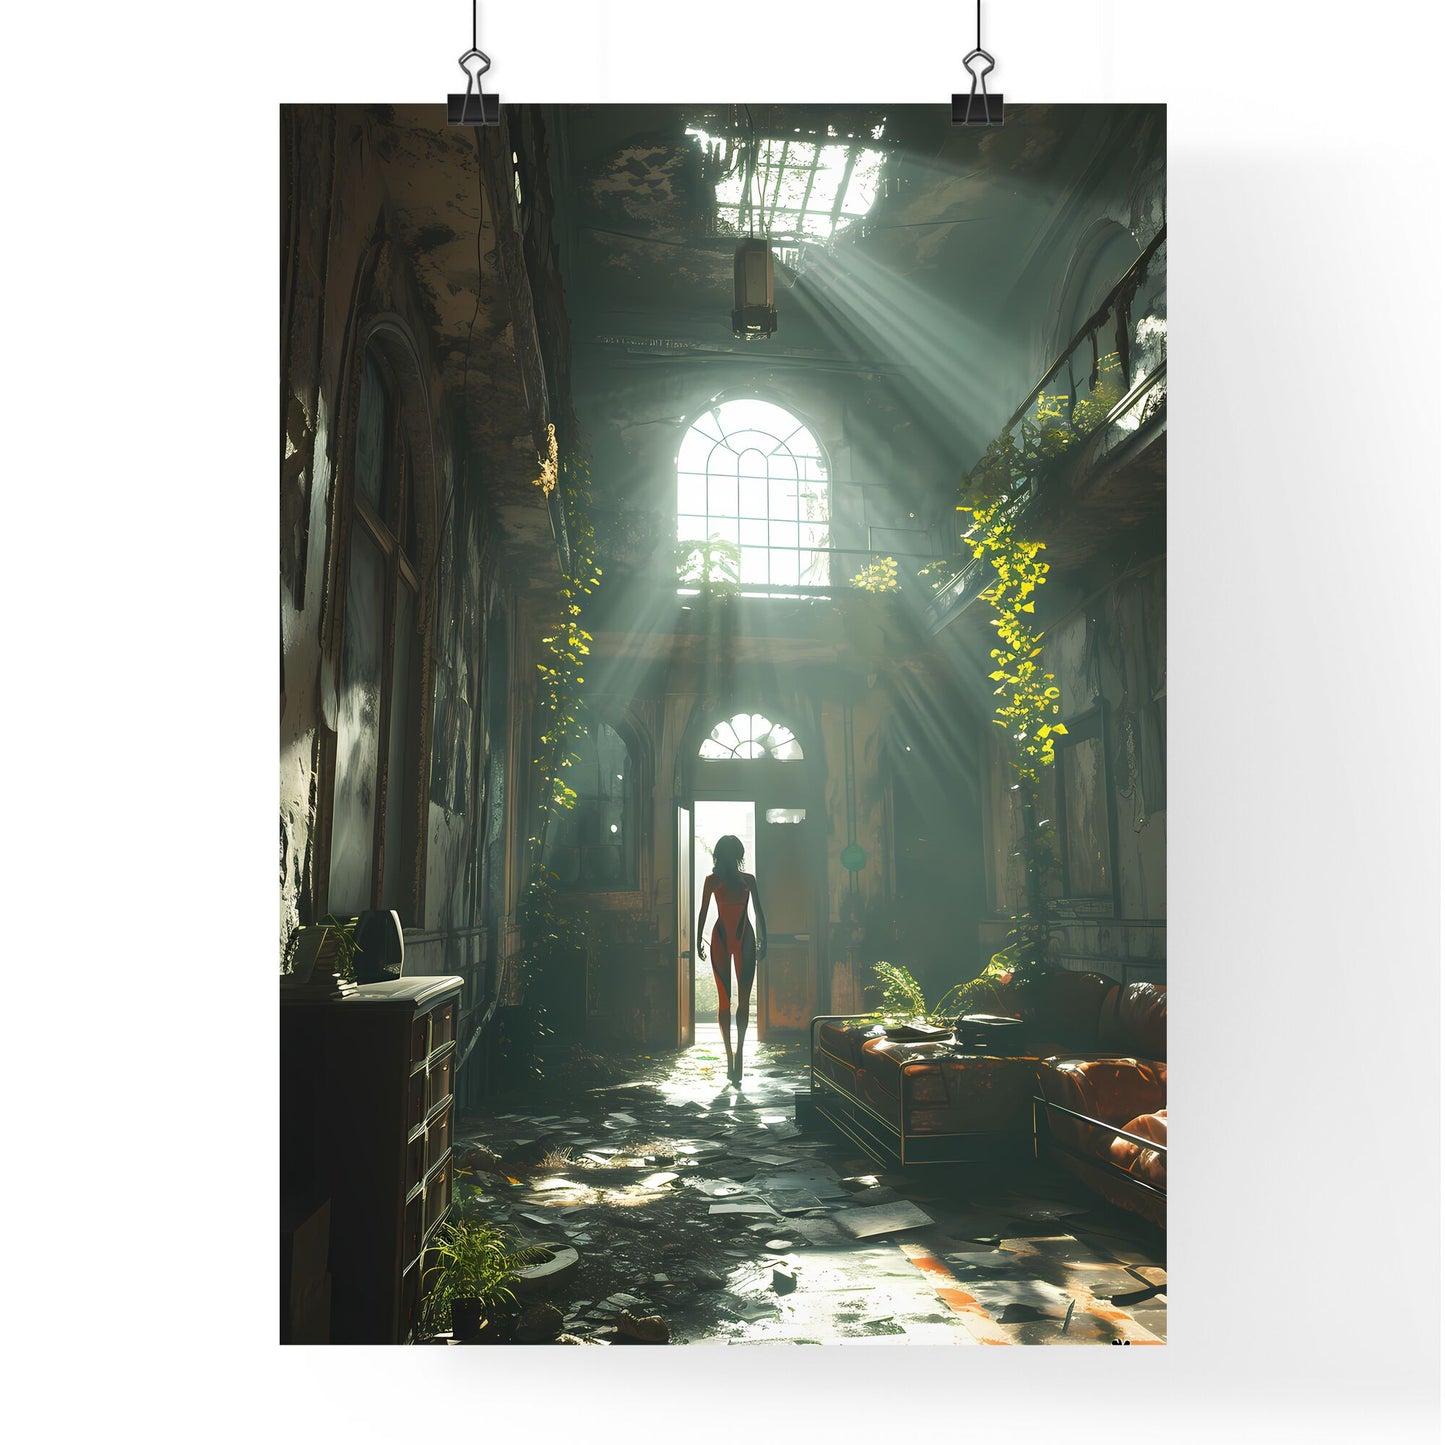 A Poster of the comic book character Vampirella - A Woman Walking In A Hallway With Sunlight Shining Through The Windows Default Title